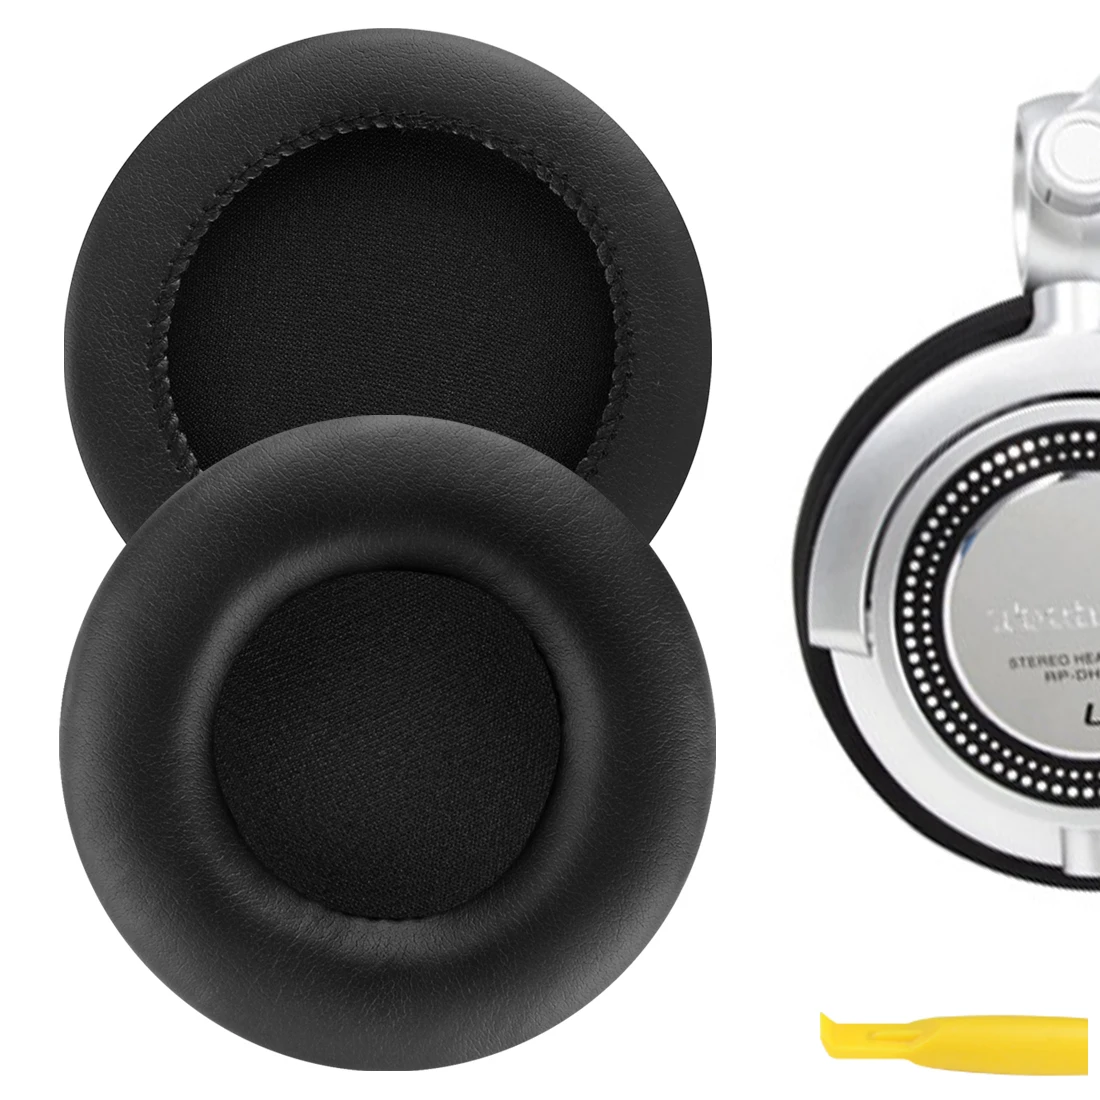 

Geekria QuickFit Replacement Ear Pads for Panasonic TECHNICS RP-DH1200 DJ, RP-DH1210, RP-DH1250-S DJ Headphones